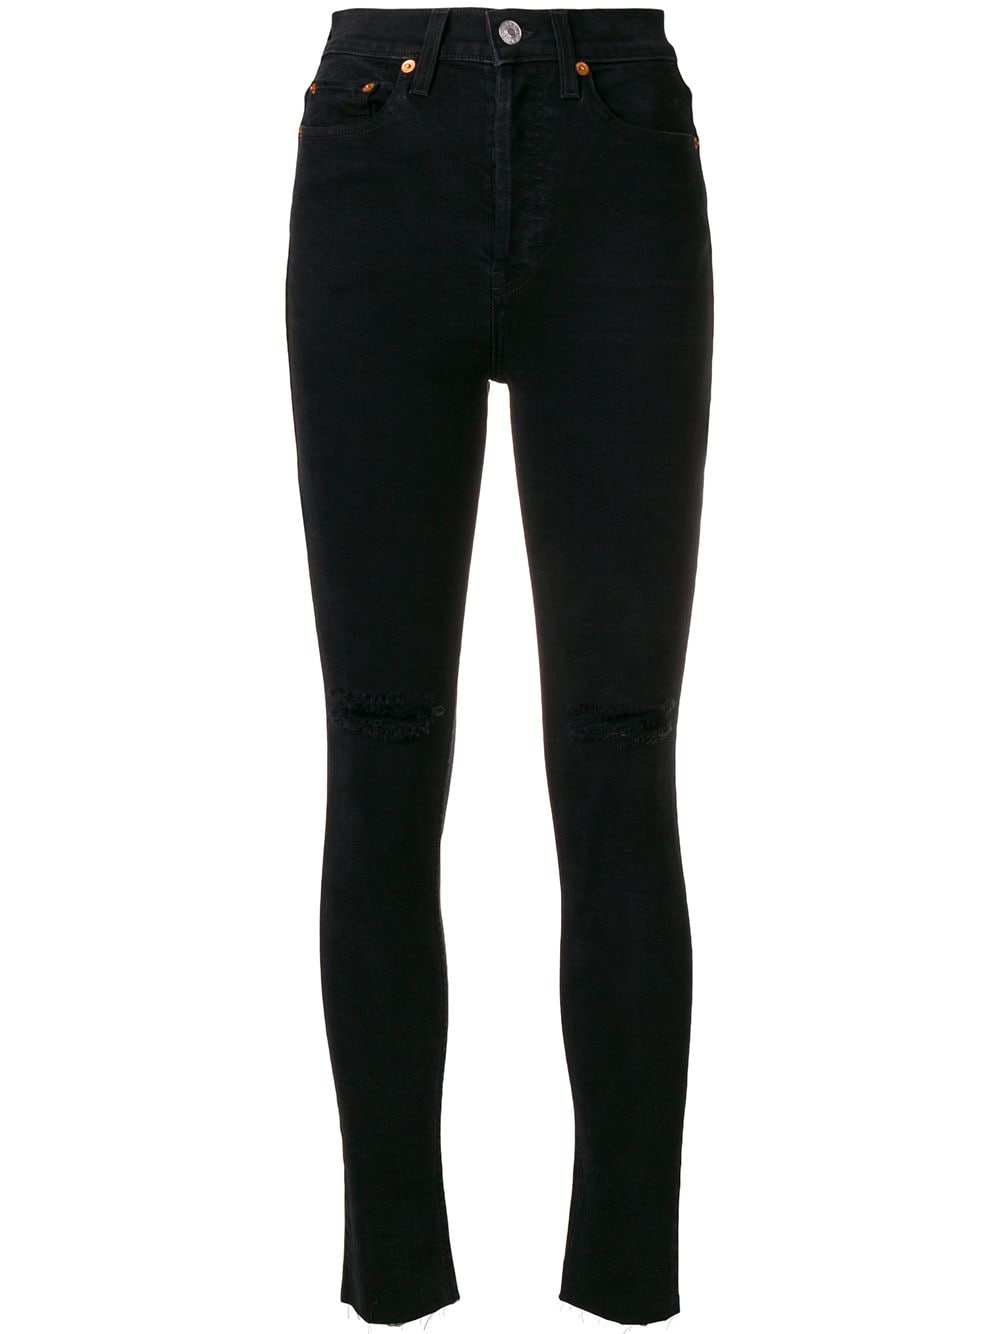 Shop black RE/DONE high rise ankle crop 